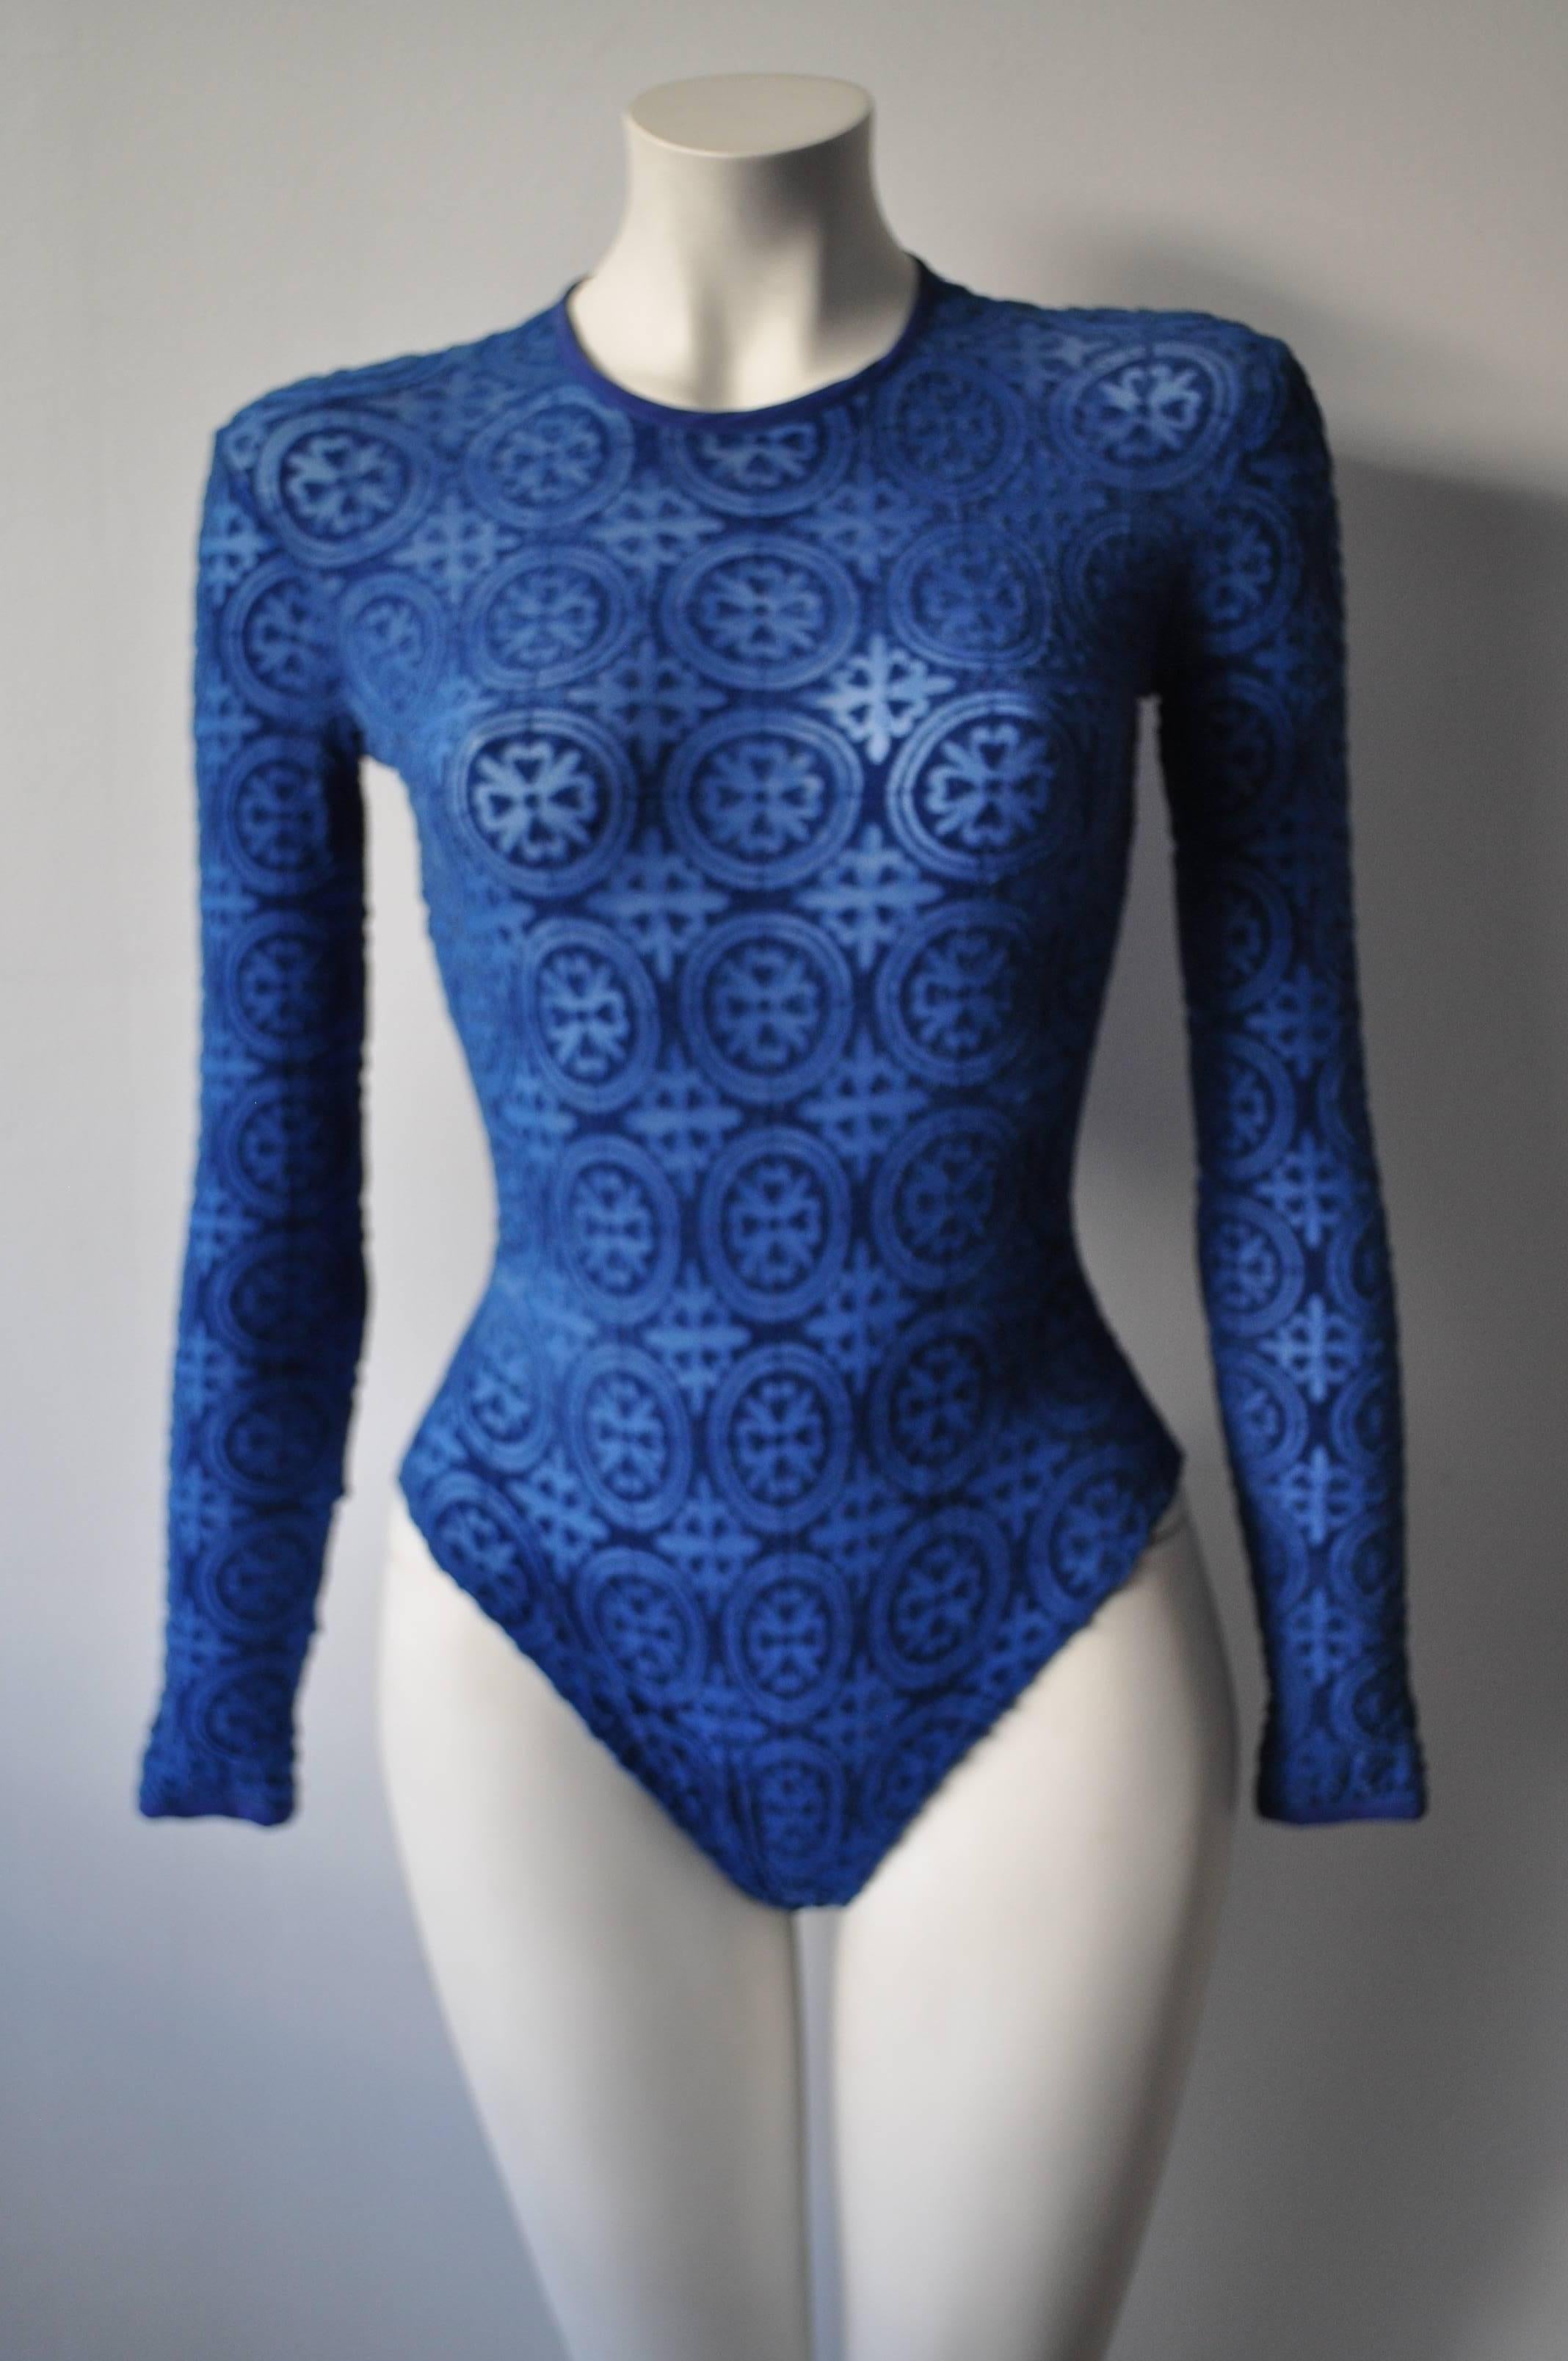 Gianni Versace Blue Coupe des Velours Body Suit Punk Collection Spring 1994 The collection was a combination of hippie, punk, and grunge influence that was youthful, upbeat and innovative. A high profile show biz extravaganza. A haute perspective on